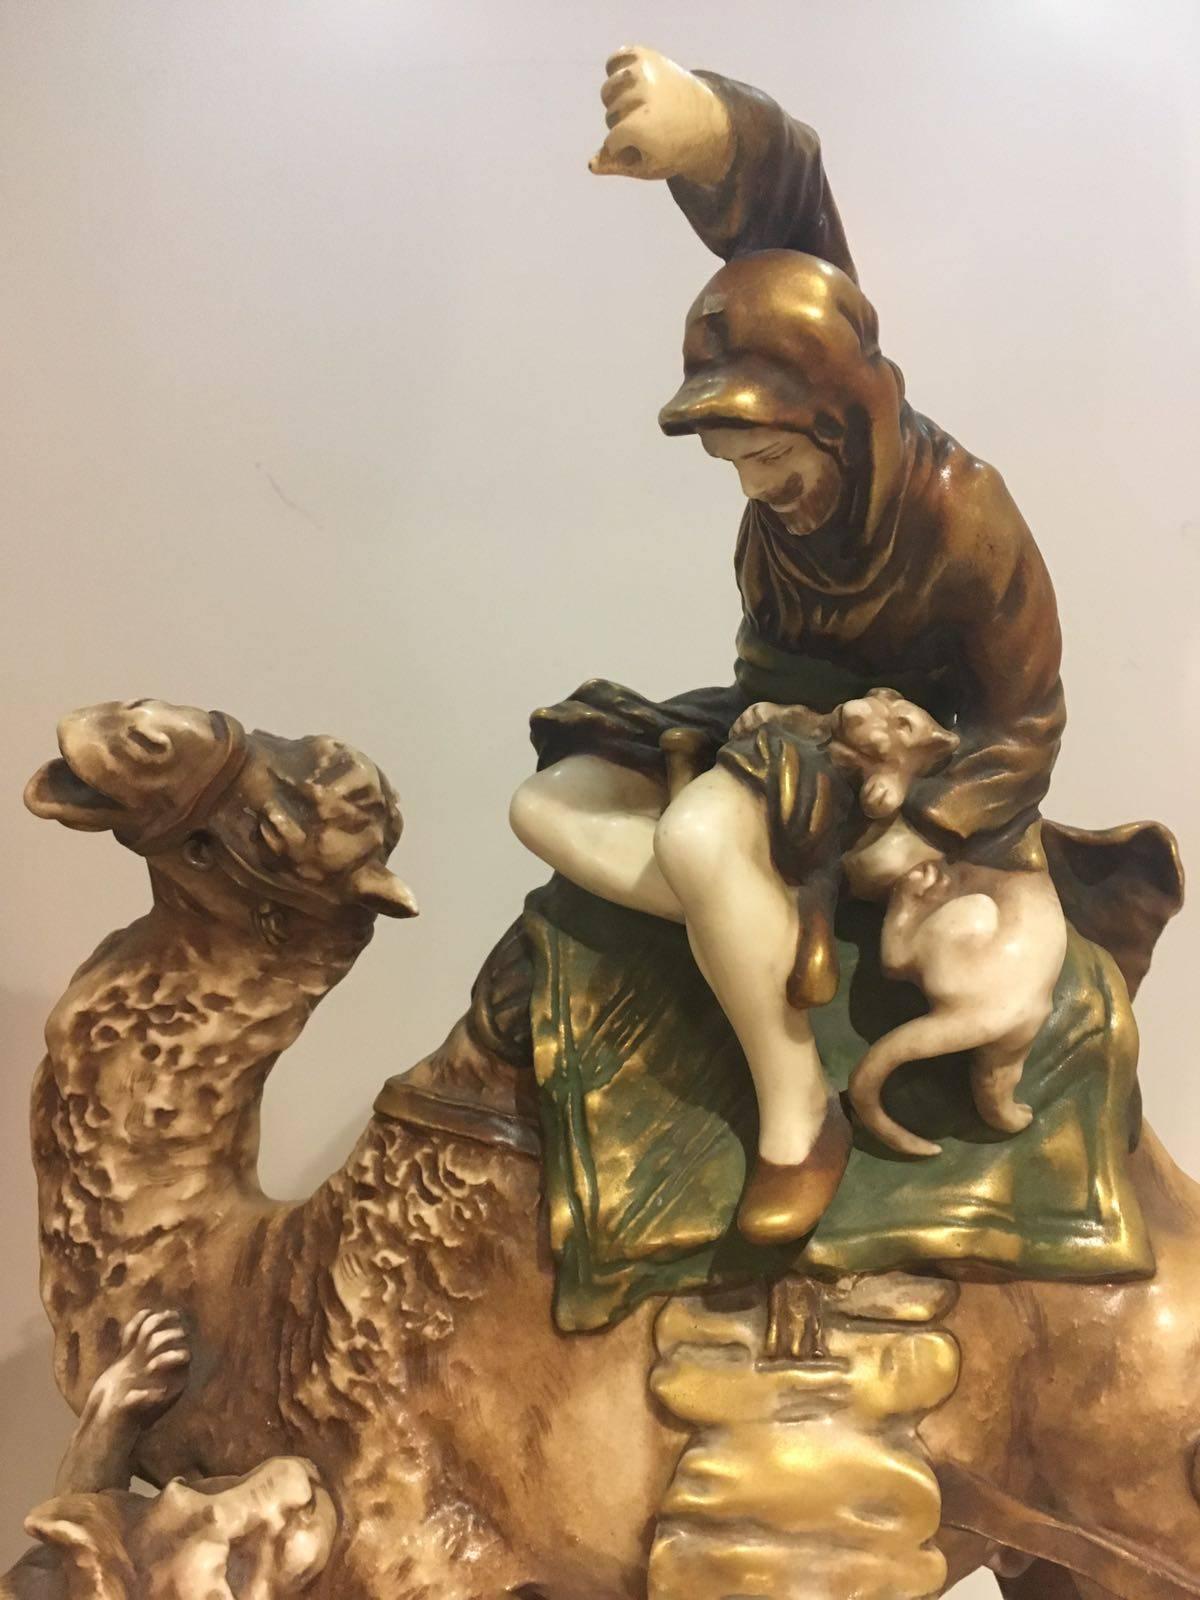 20th Century 'Amphora' Figure on Camel Back with Lion, Riessner, Stellmacher & Kessel For Sale